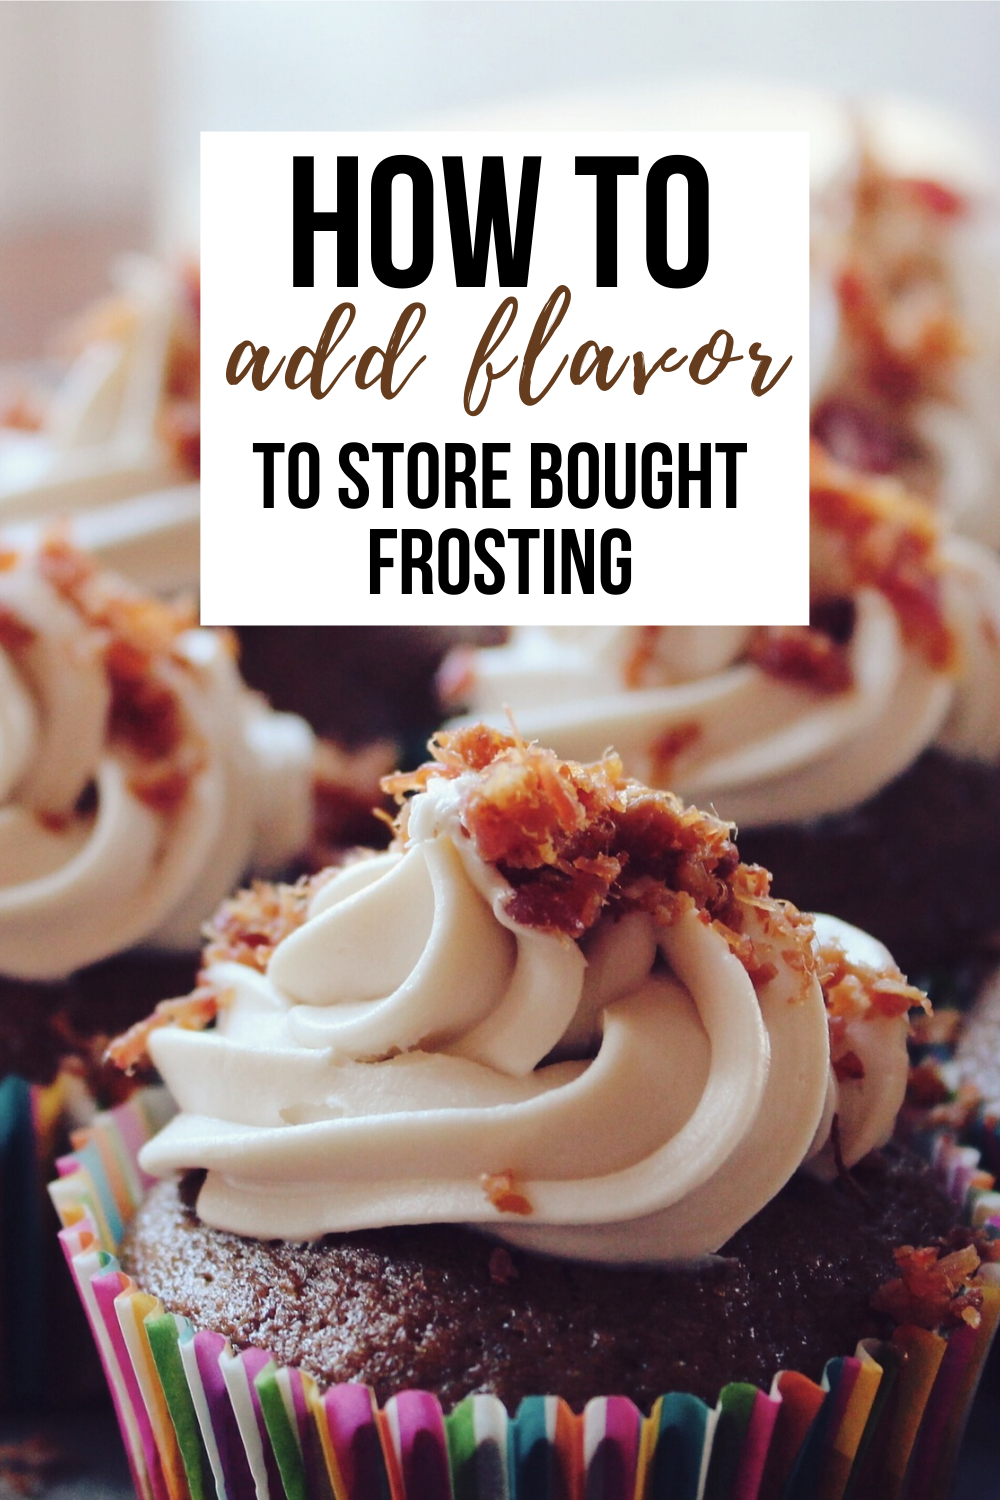 How To Add Flavor To Store Bought Frosting